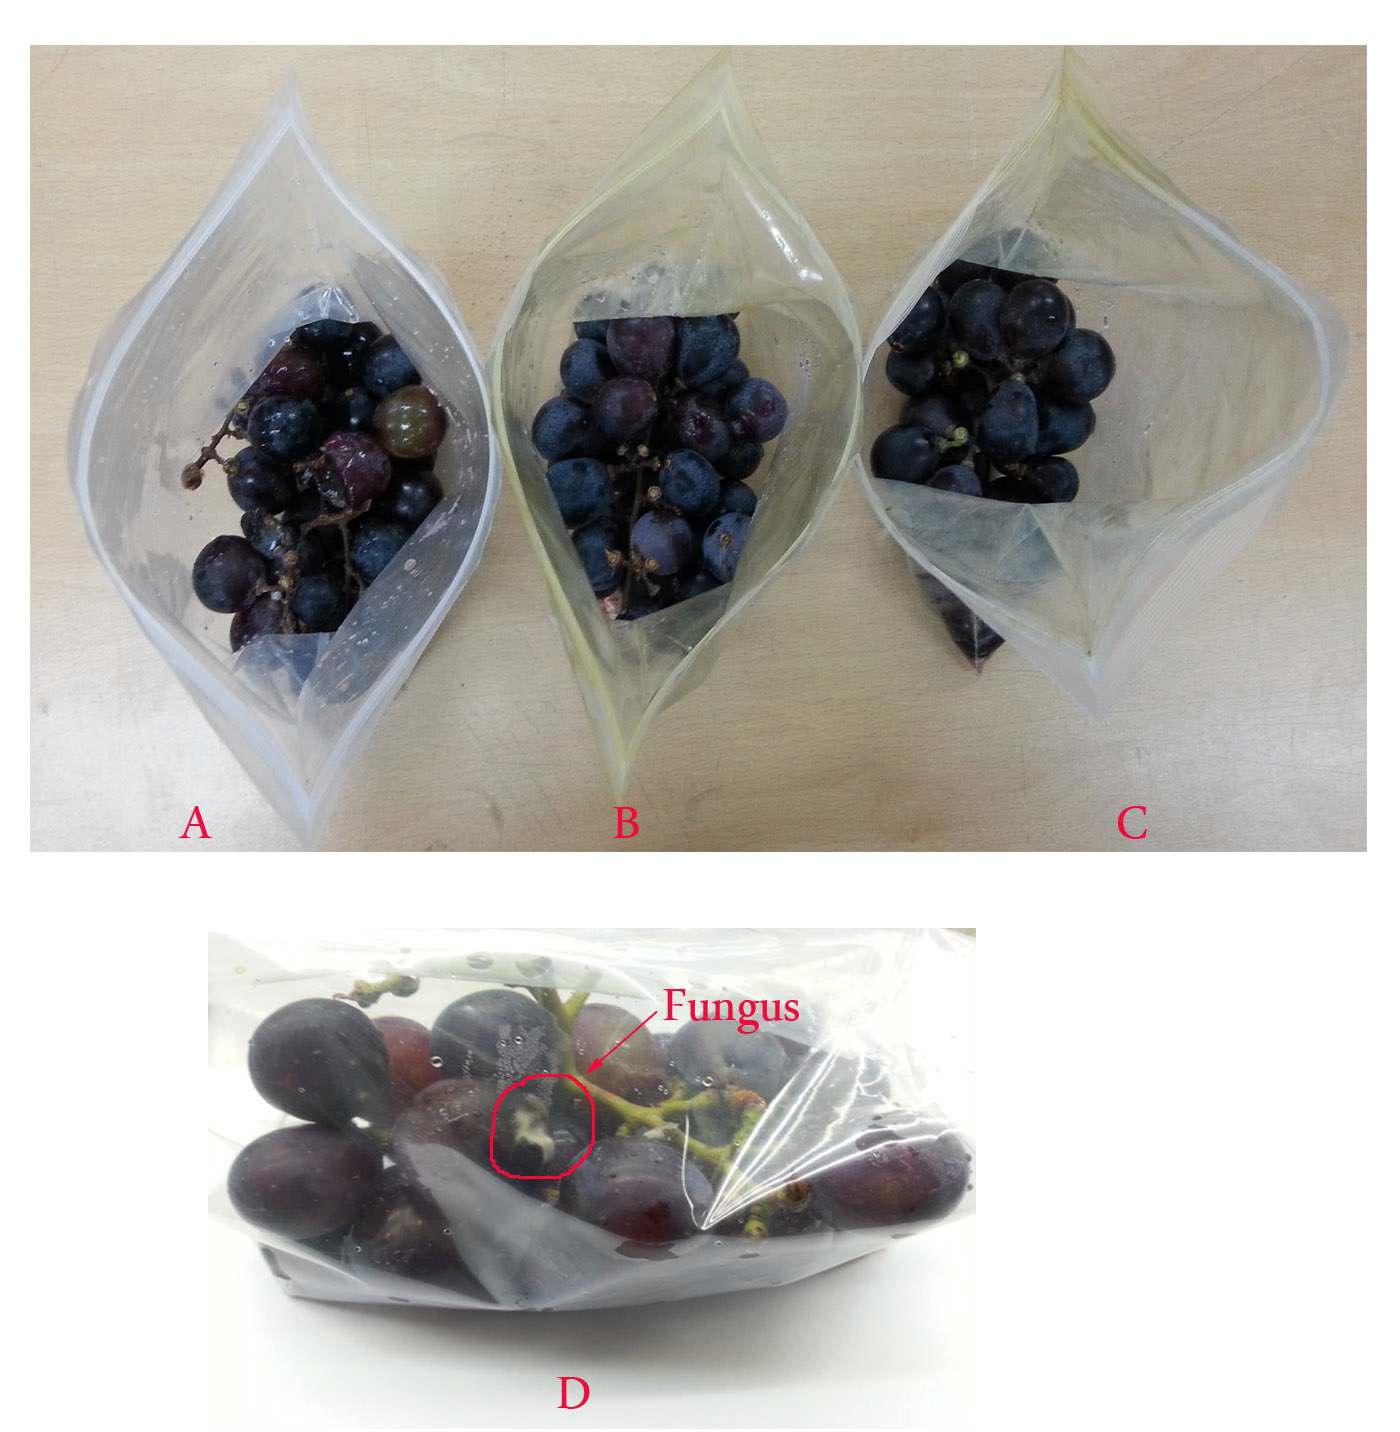 Grape samples packed in different PE film bags after seven days storage at 25 ± 1℃. (A) Control, (B) Metasequoia leaf extract coated film, (C) Metasequoia cone extract coated film, (D) Appearance of fungus in grapes packed in control PE film.